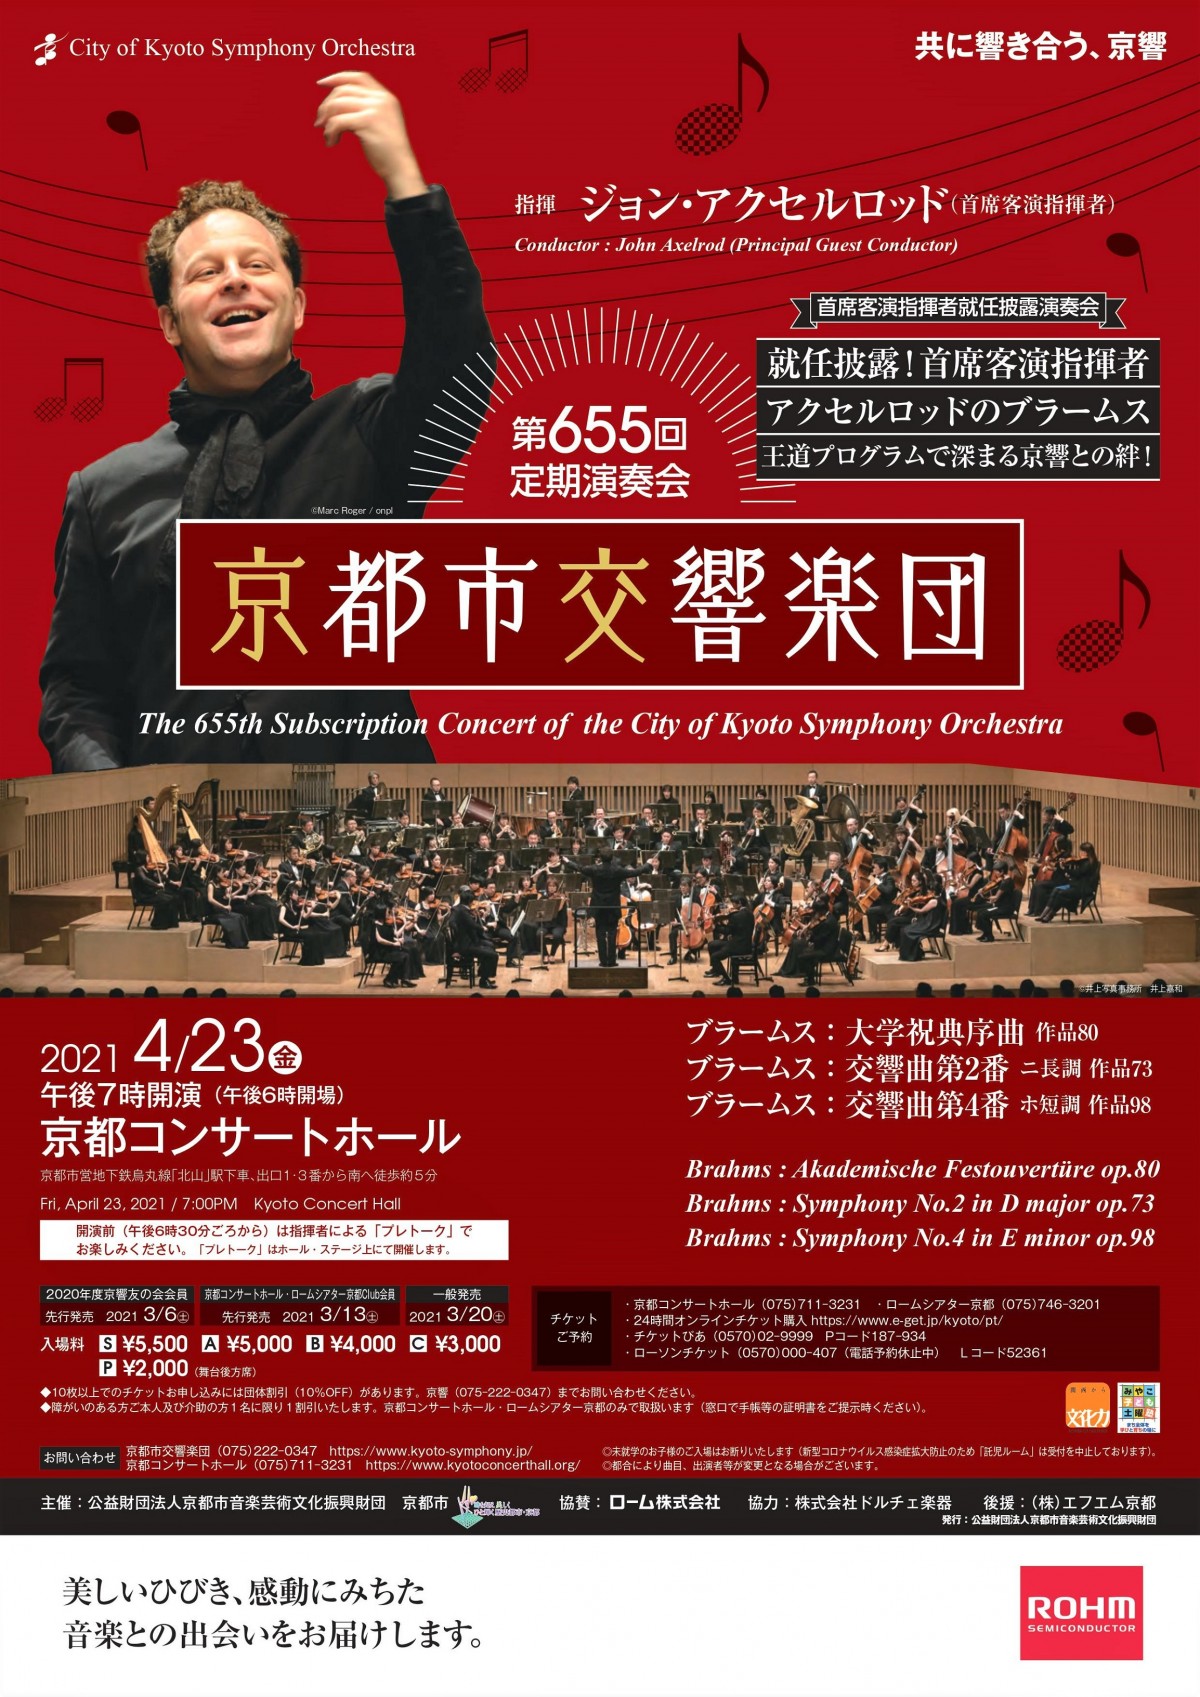 The 655th Subscription Concert